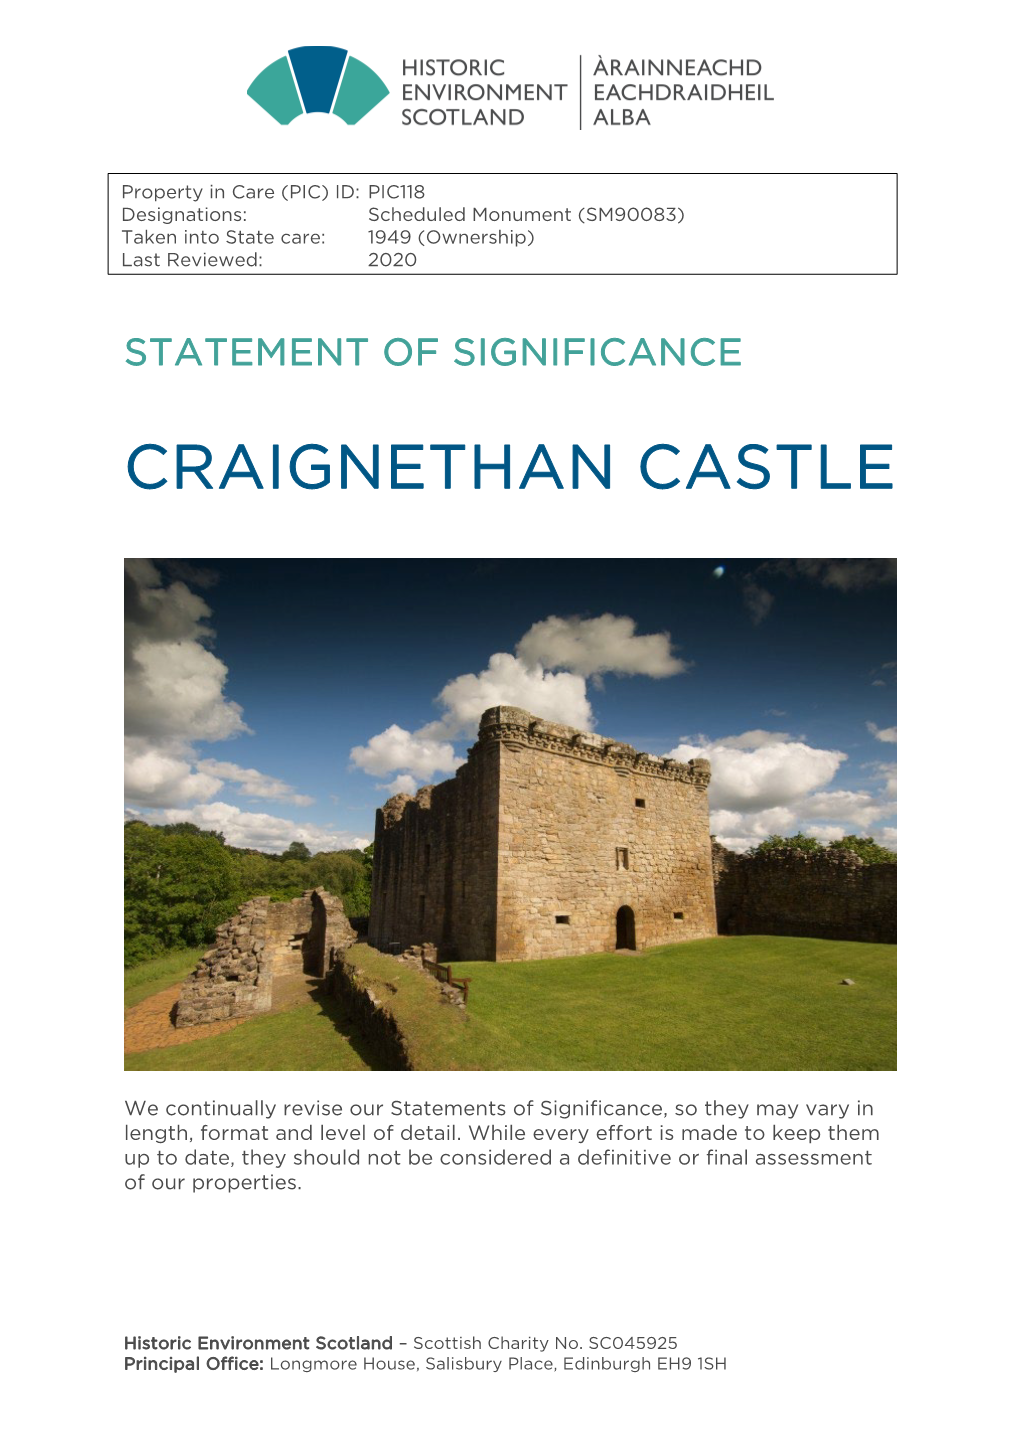 Craignethan Castle Statement of Significance